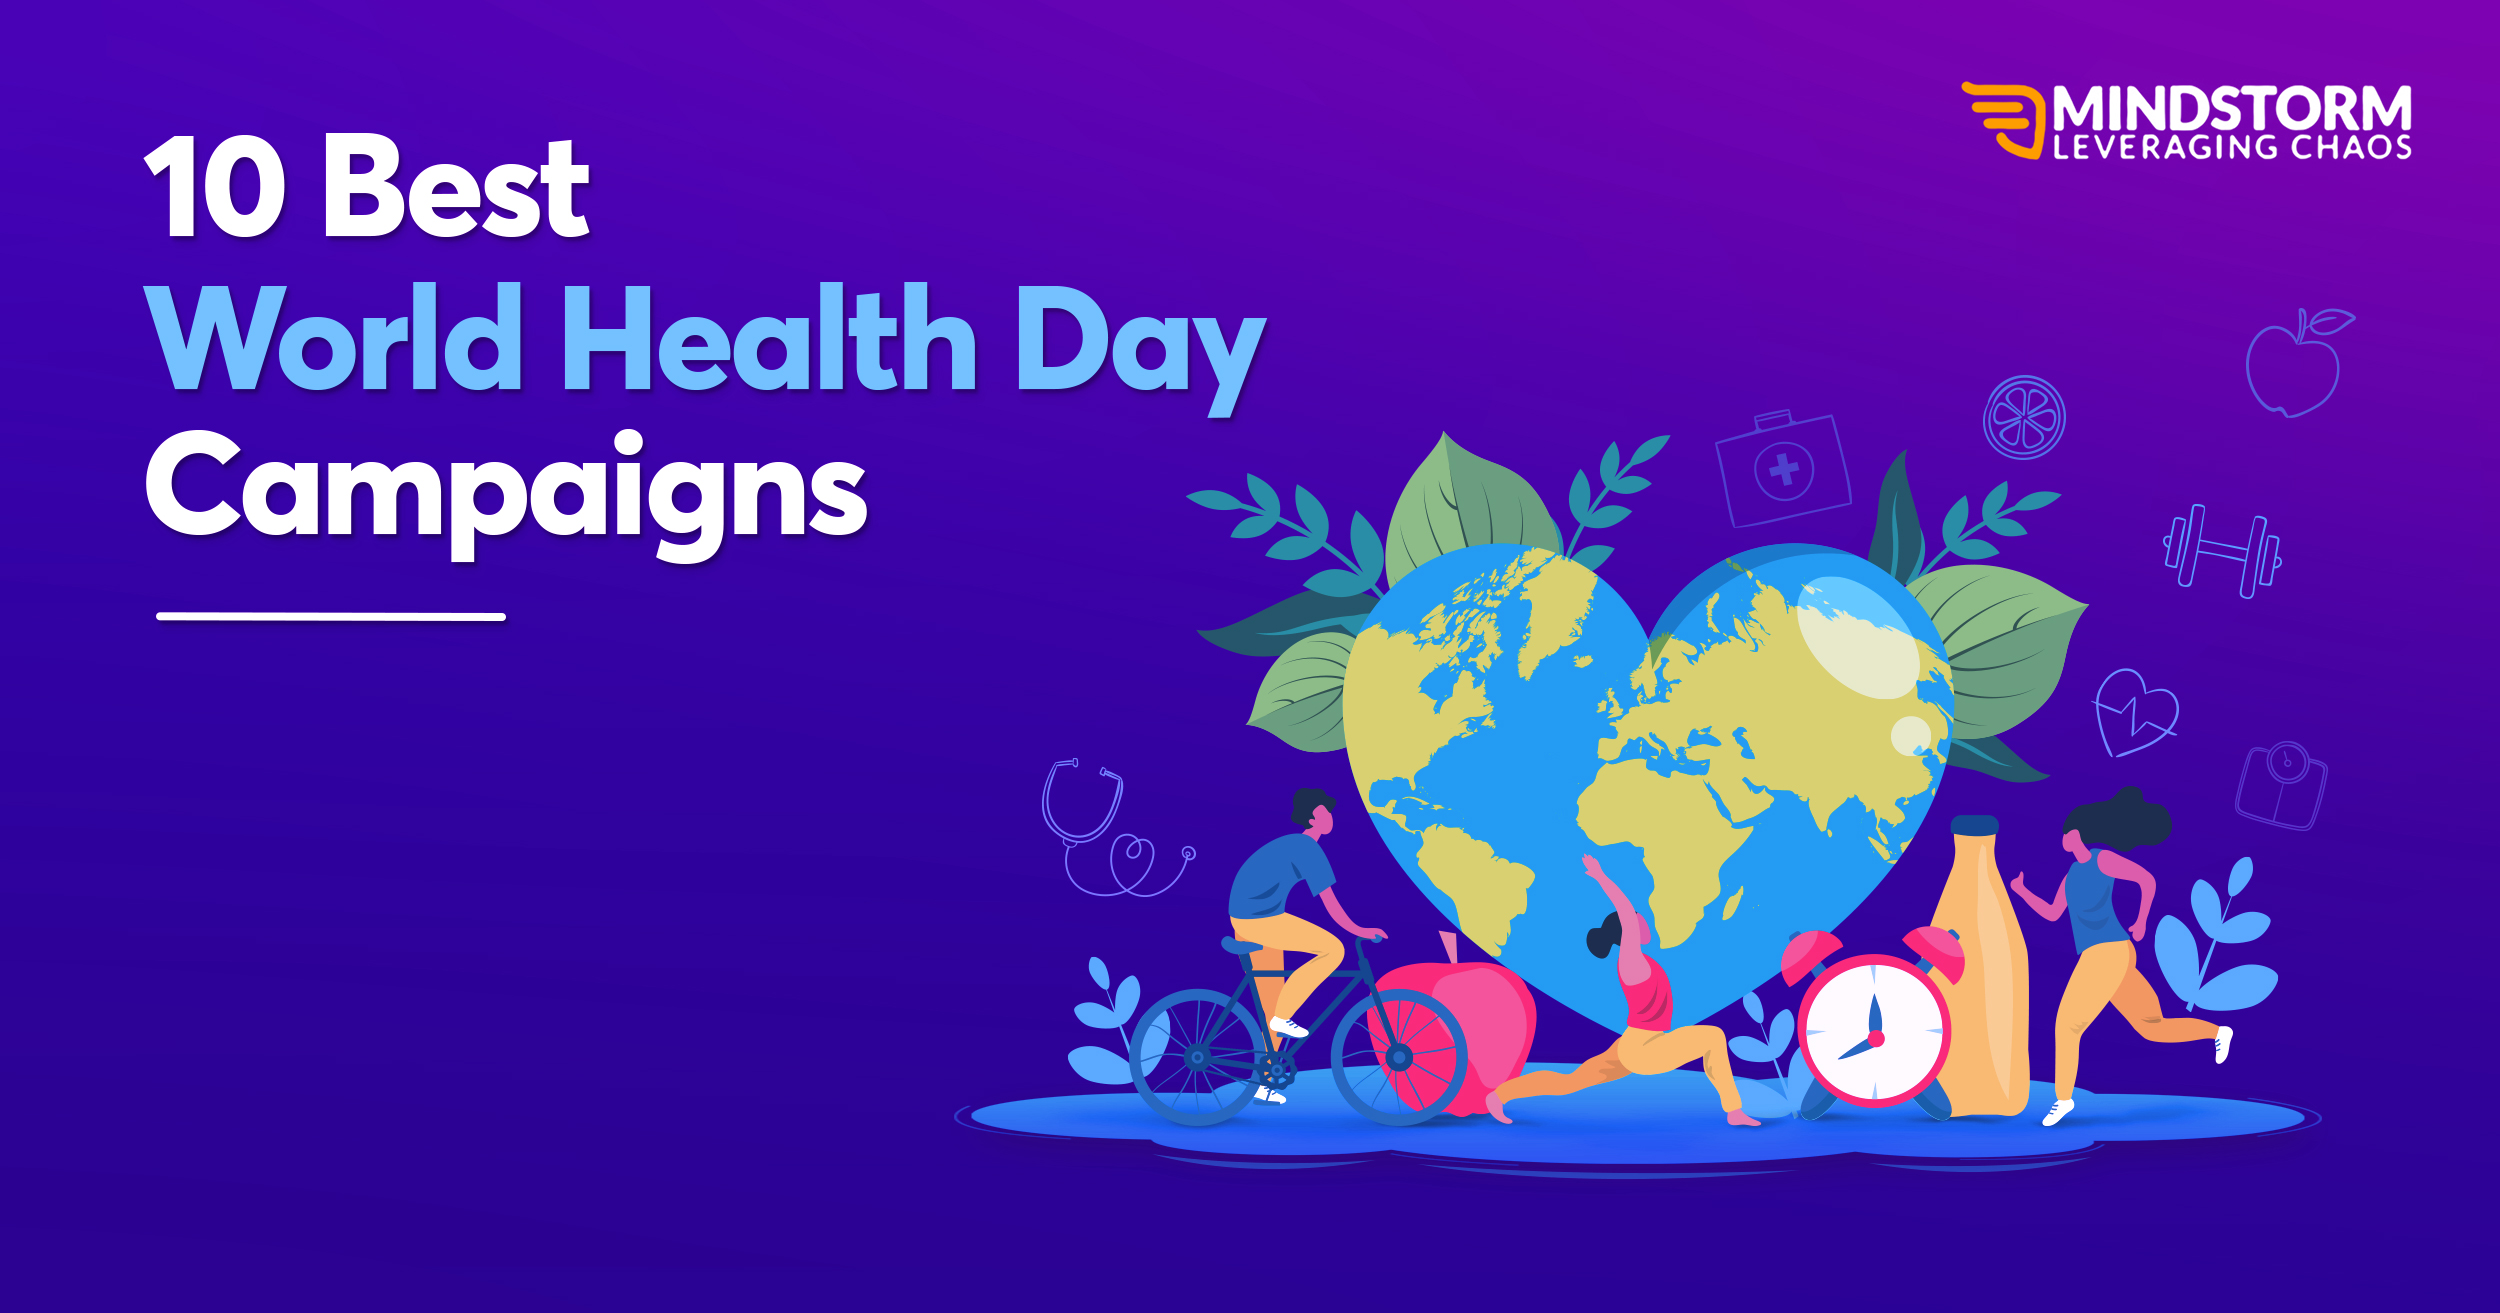 10 Best World Health Day Campaigns